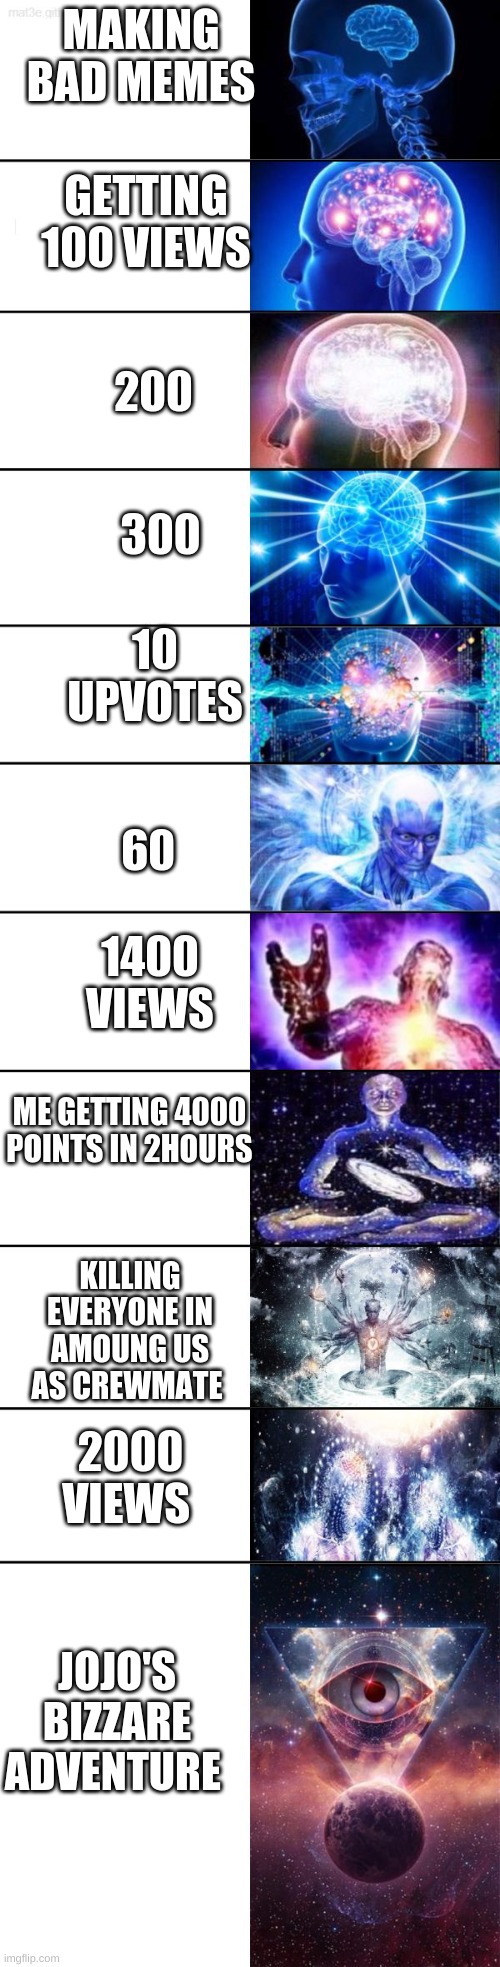 meme logic | GETTING 100 VIEWS; MAKING BAD MEMES; 200; 300; 10 UPVOTES; 60; 1400 VIEWS; ME GETTING 4000 POINTS IN 2HOURS; 2000 VIEWS; KILLING EVERYONE IN AMOUNG US AS CREWMATE; JOJO'S BIZARRE ADVENTURE | image tagged in extended expanding brain | made w/ Imgflip meme maker